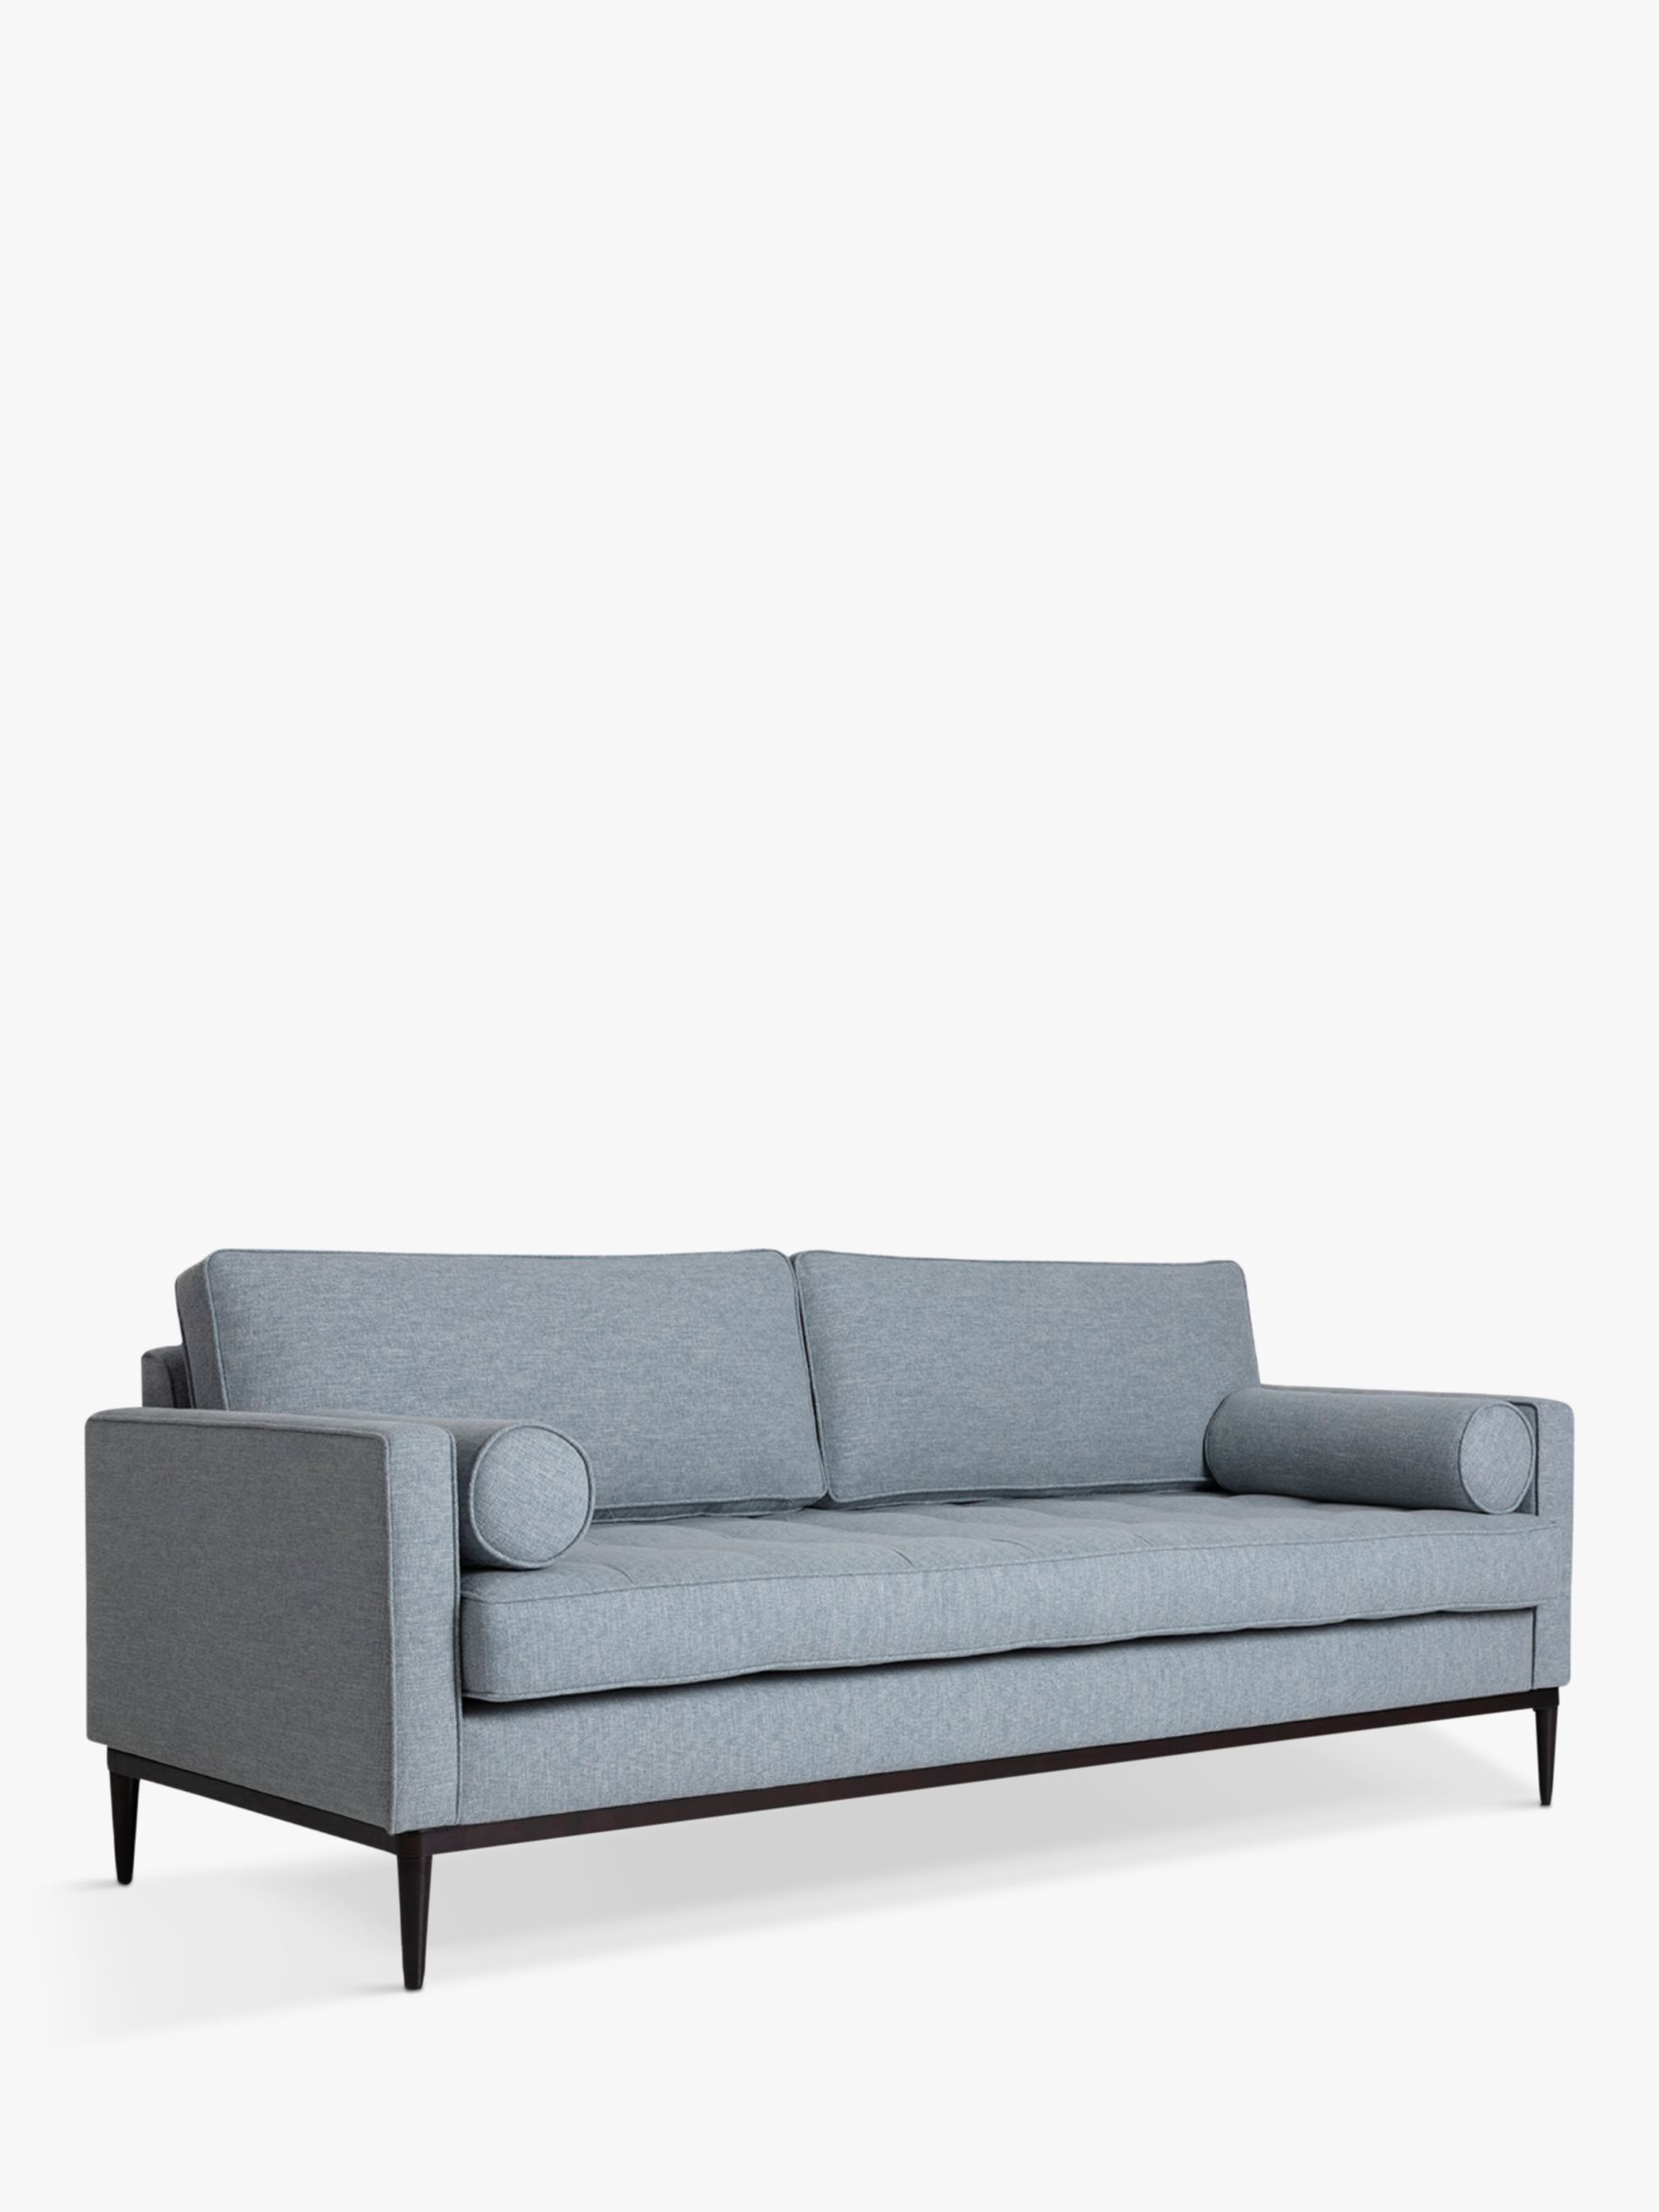 Photo of Swyft model 02 large 3 seater sofa